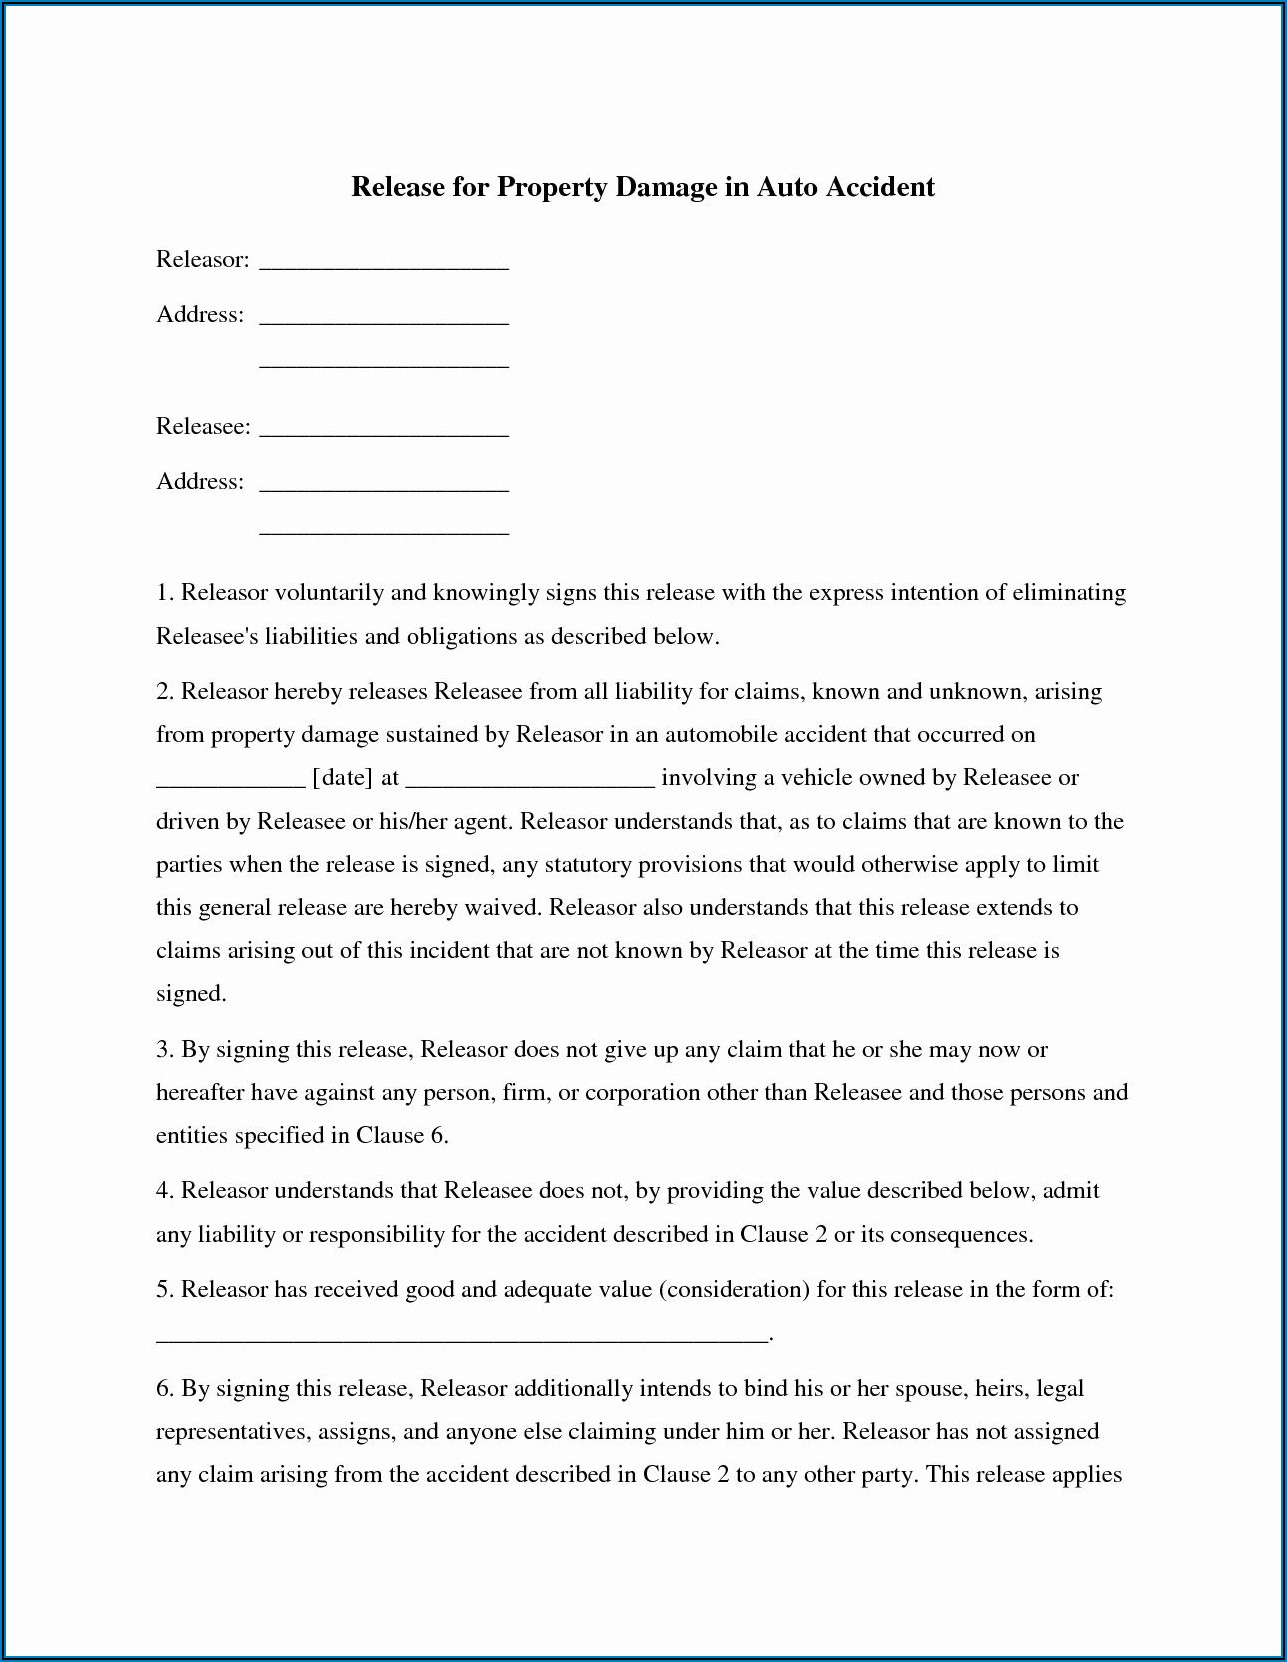 Auto Accident Settlement Agreement Template